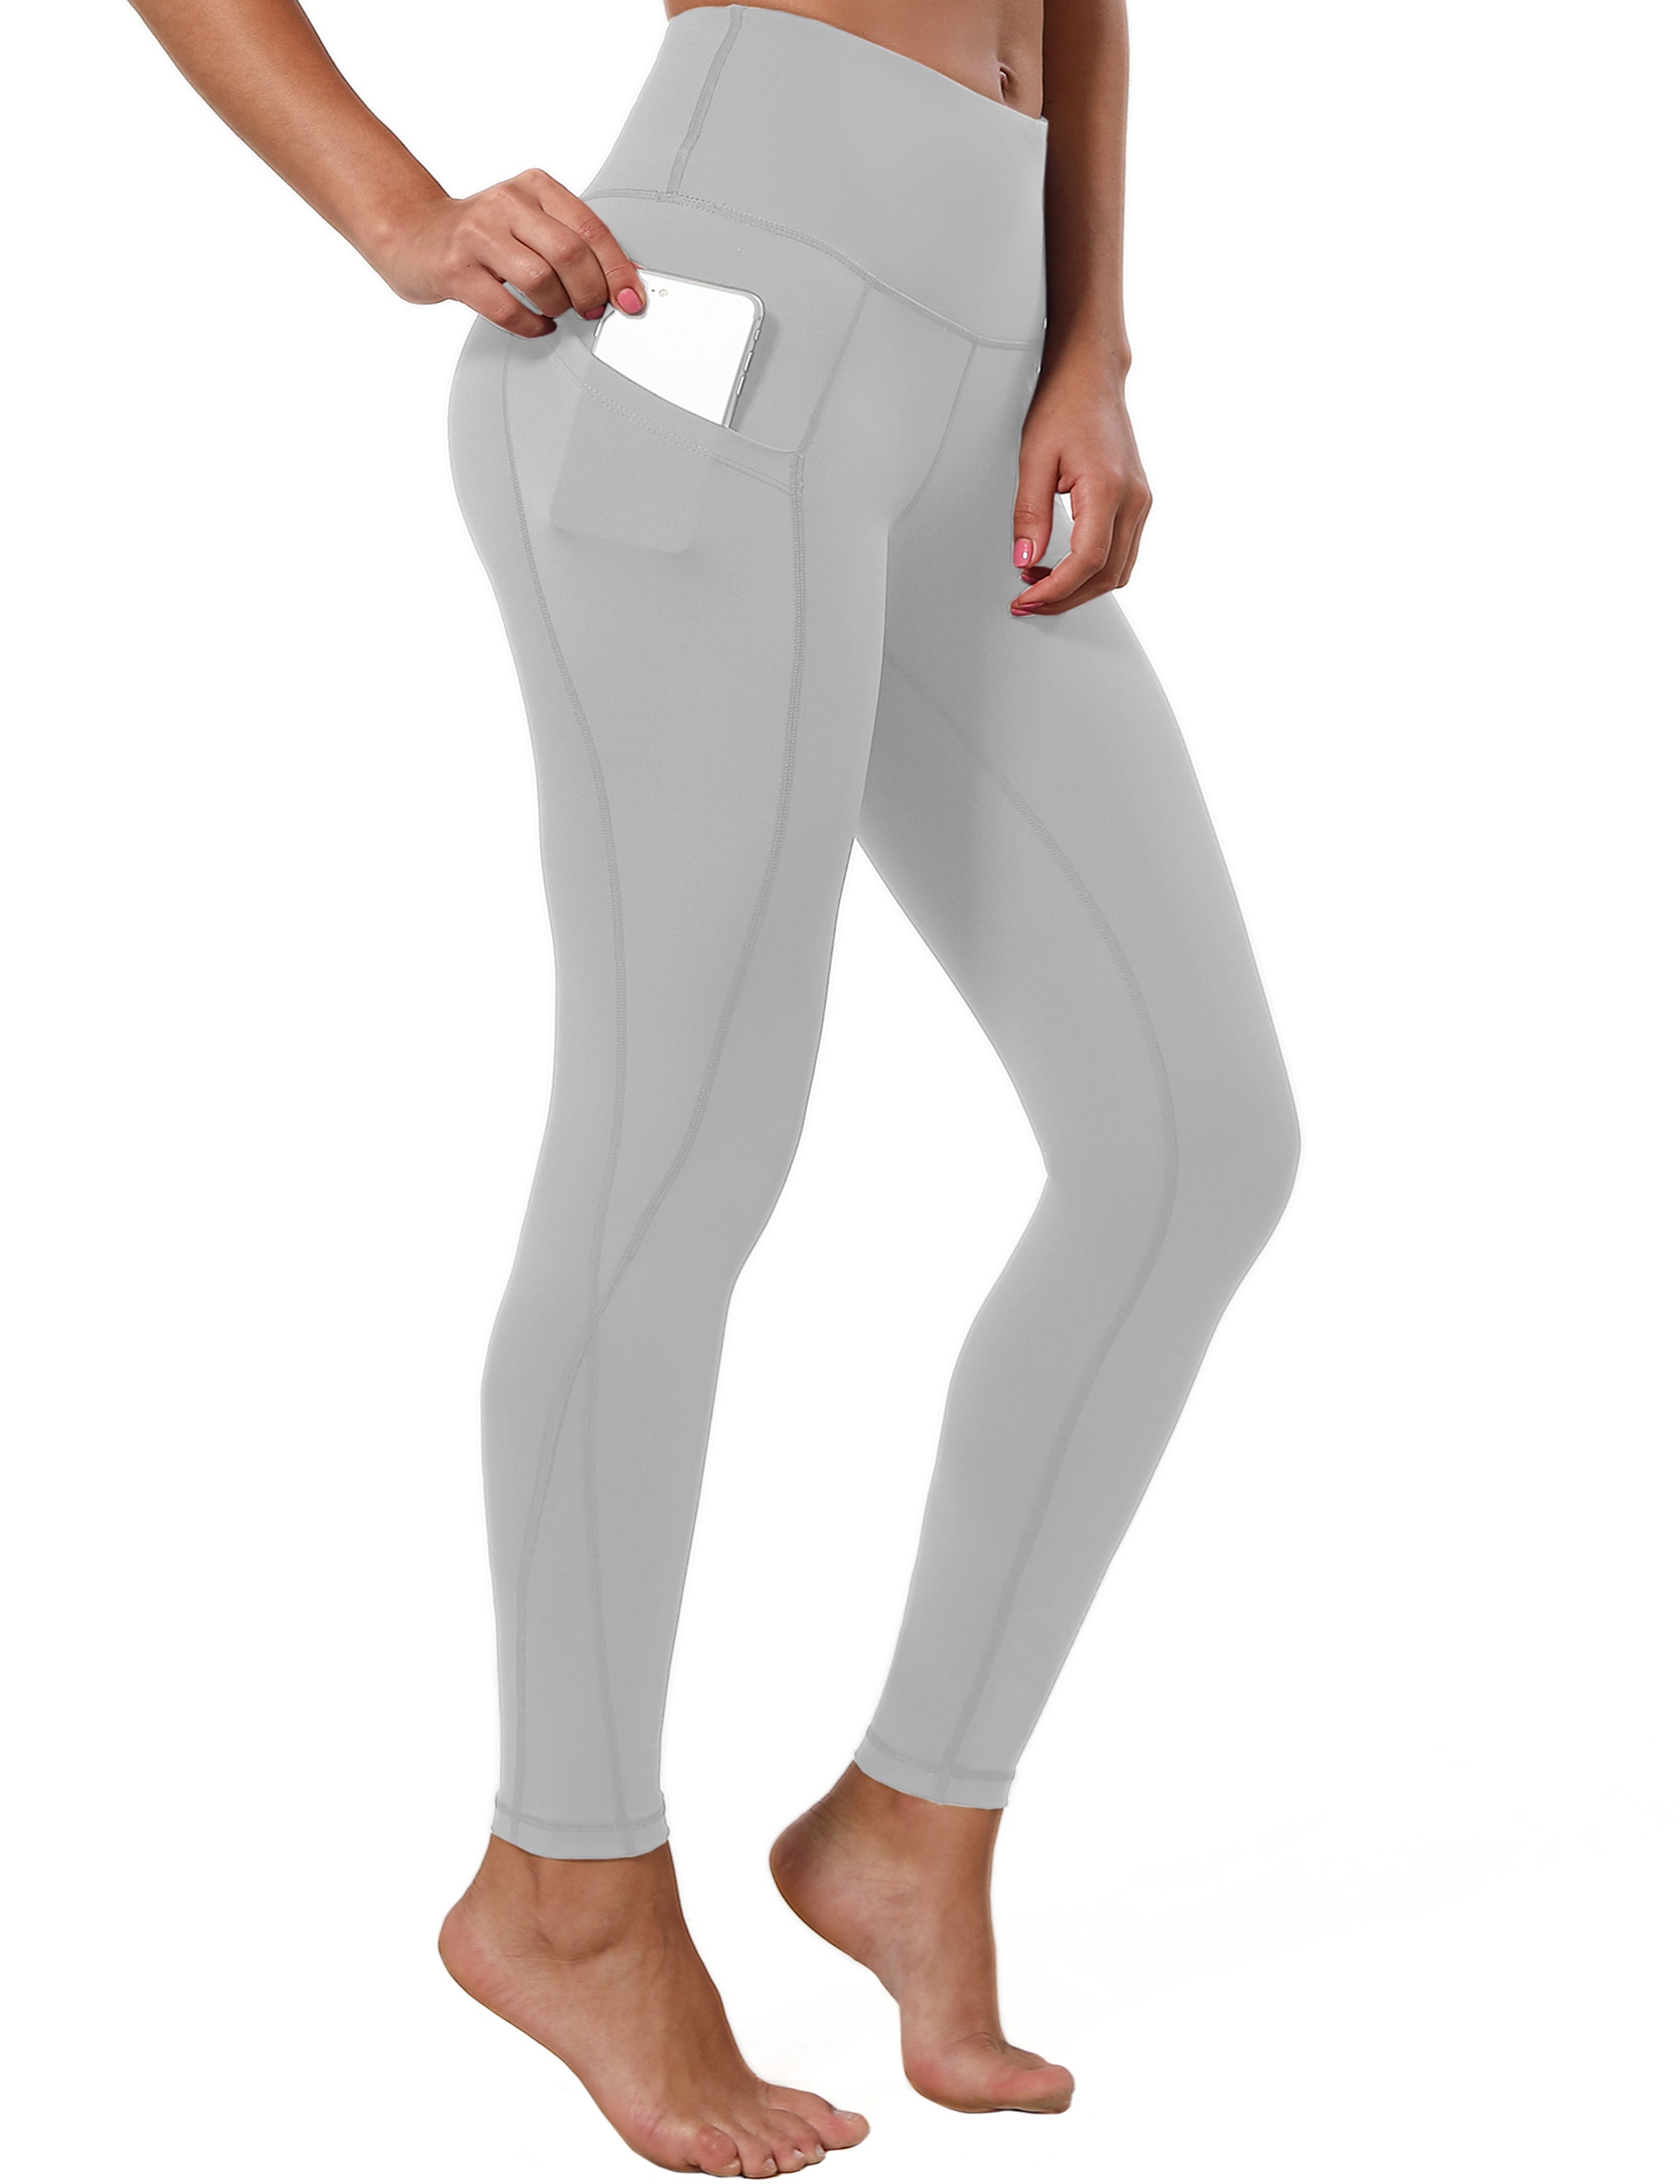 High Waist Side Pockets Gym Pants lightgray 75% Nylon, 25% Spandex Fabric doesn't attract lint easily 4-way stretch No see-through Moisture-wicking Tummy control Inner pocket